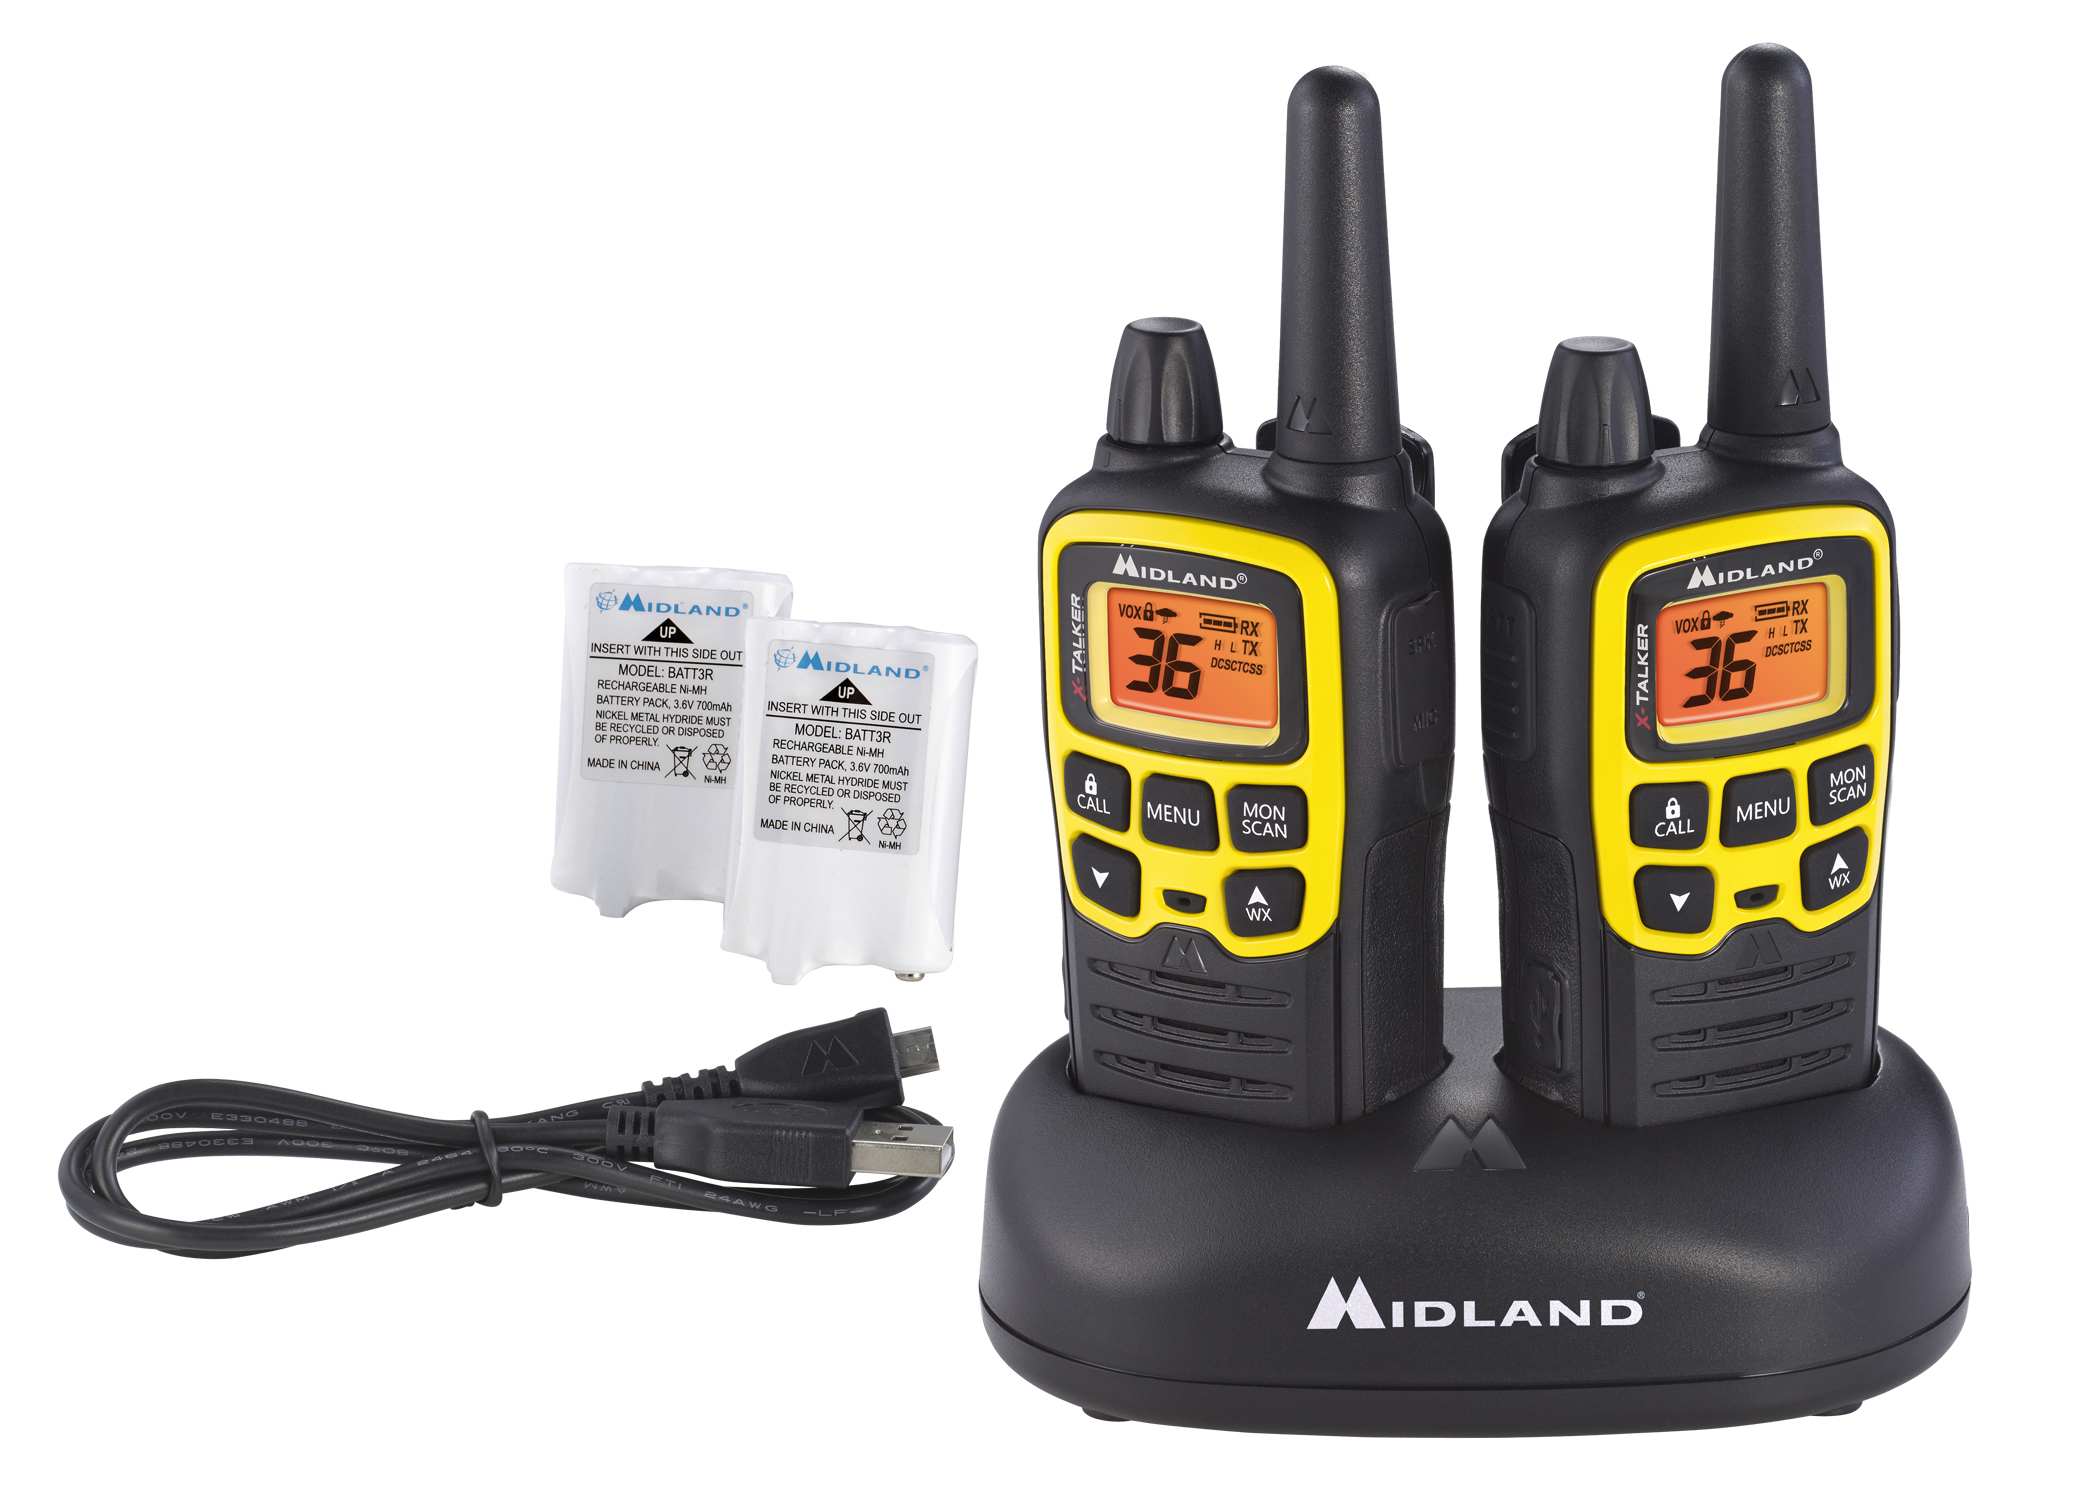 Midland T61VP3 2 - Way FRS/GMRS Radios 32 - Mile, 22, CH +14, 121